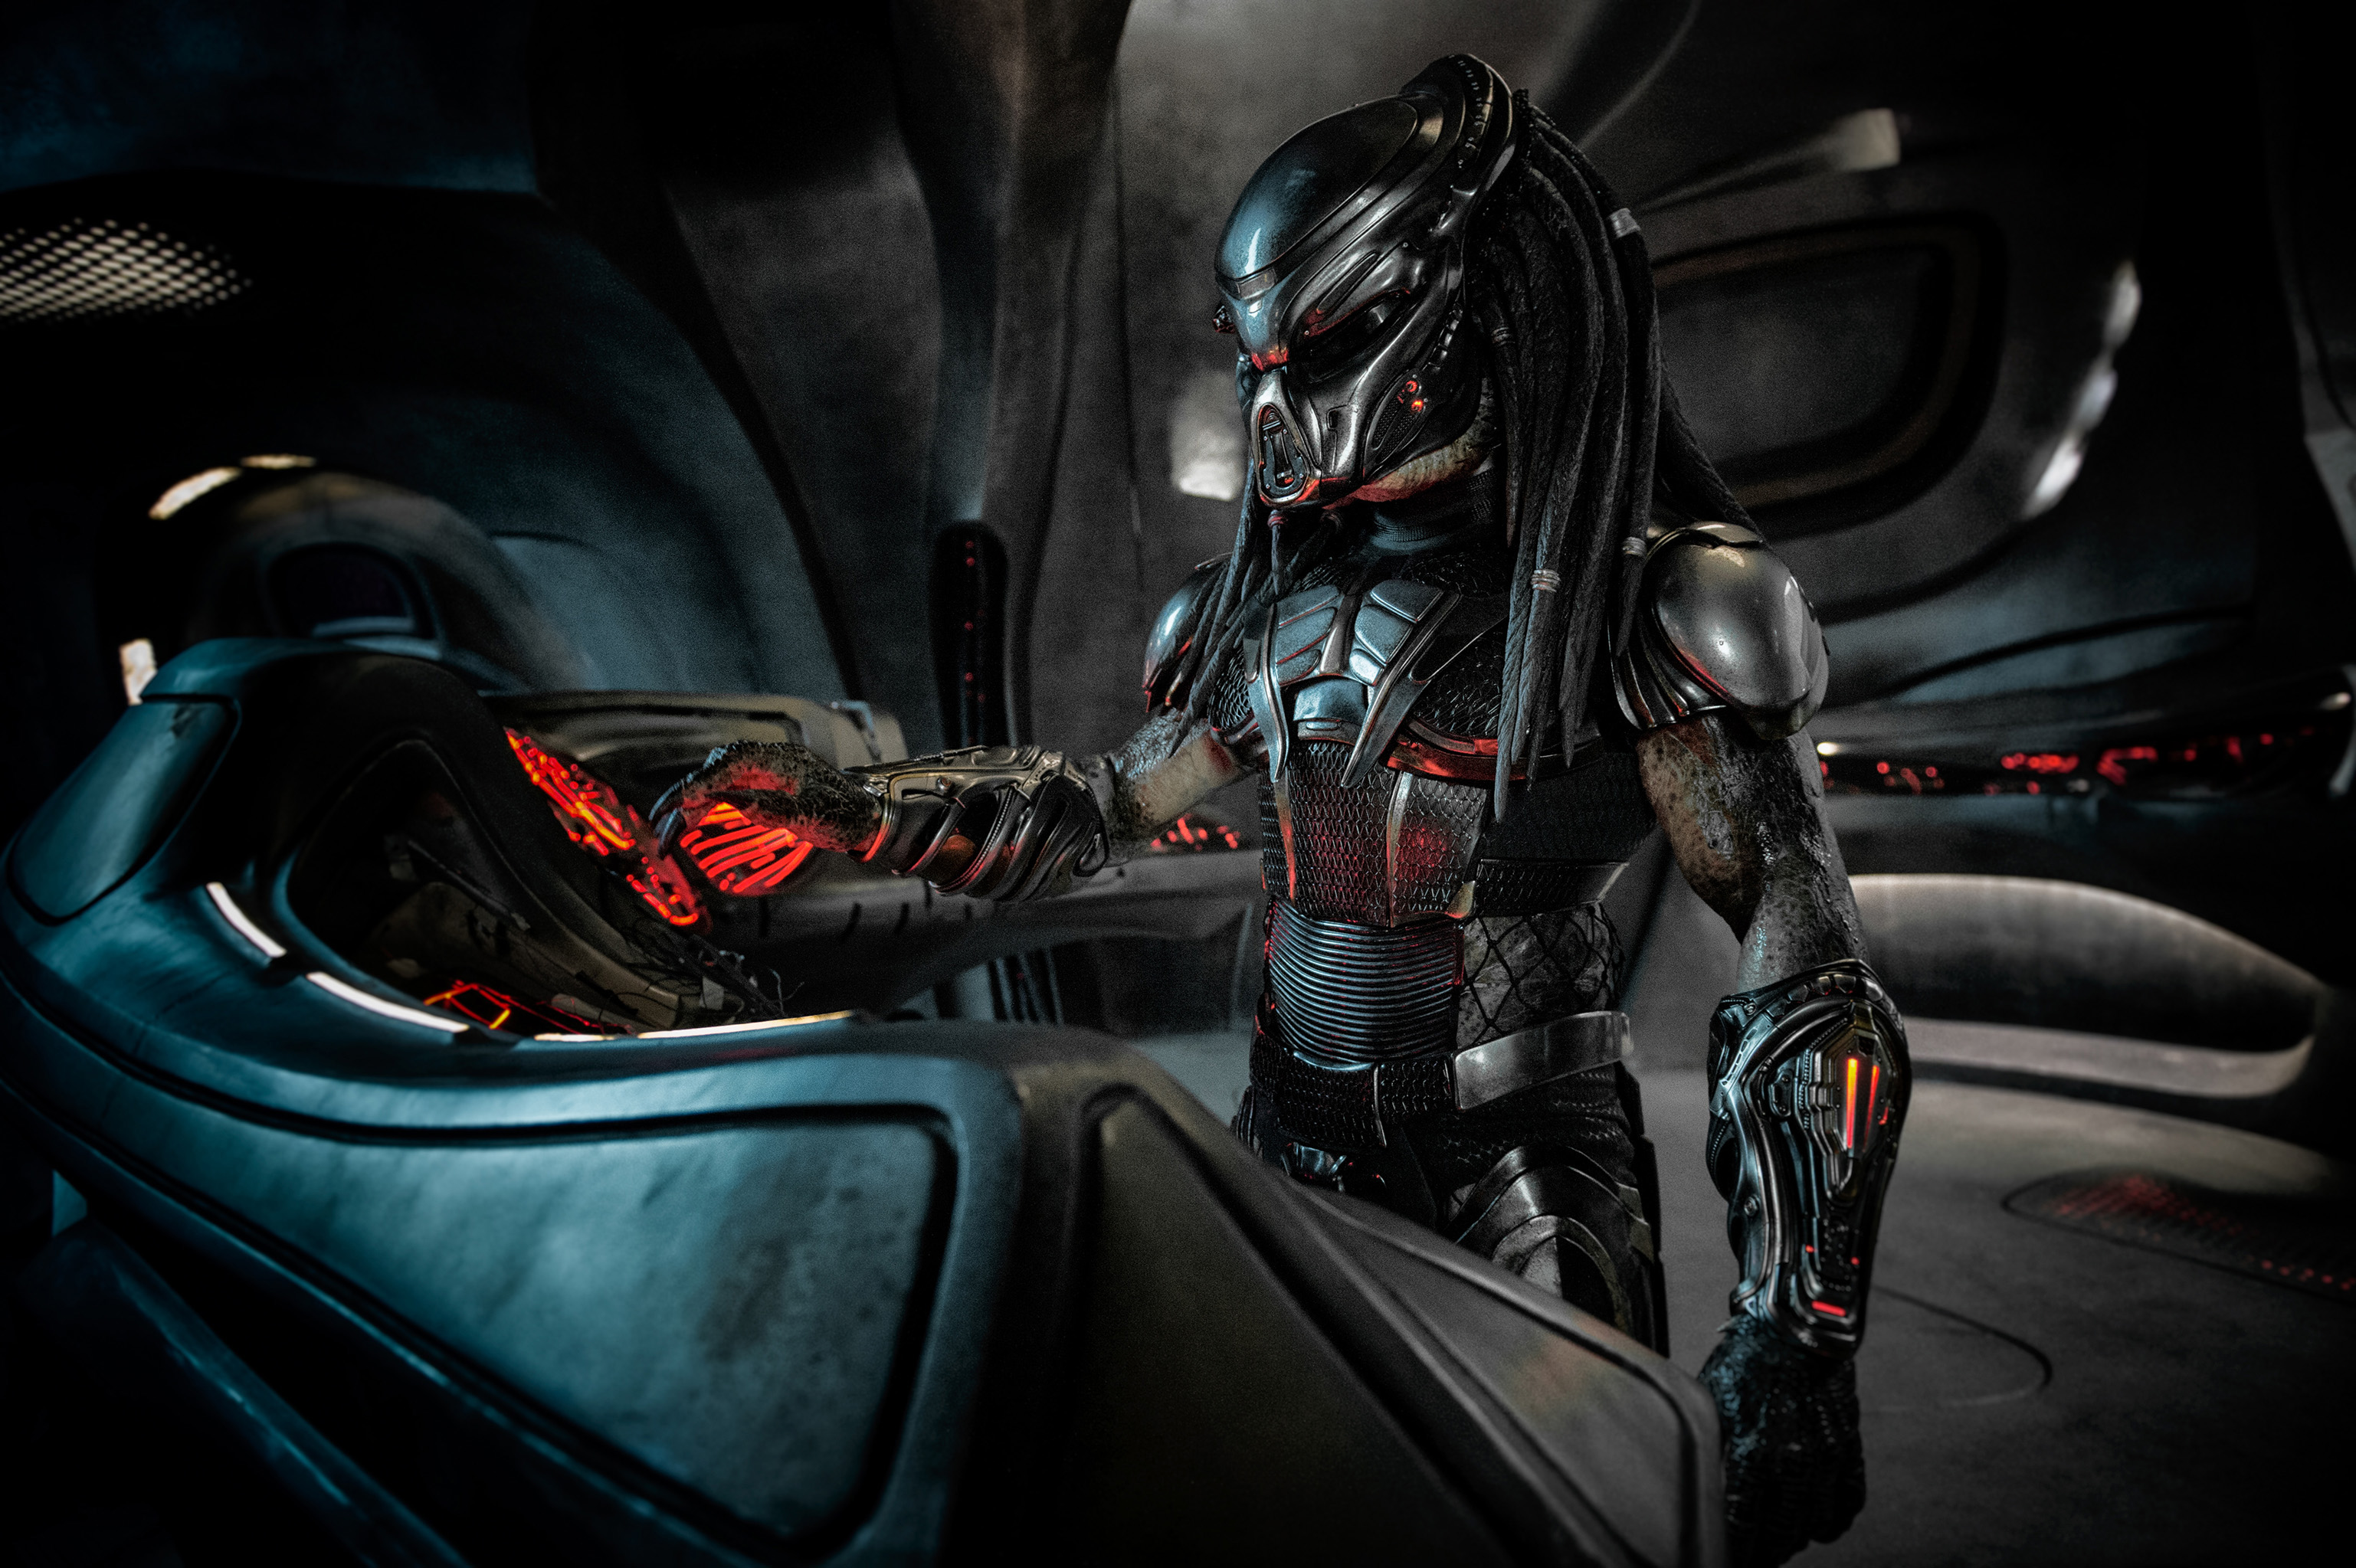 'The Predator' Movie Review and Rating: Muddled sci-fi action extravaganza